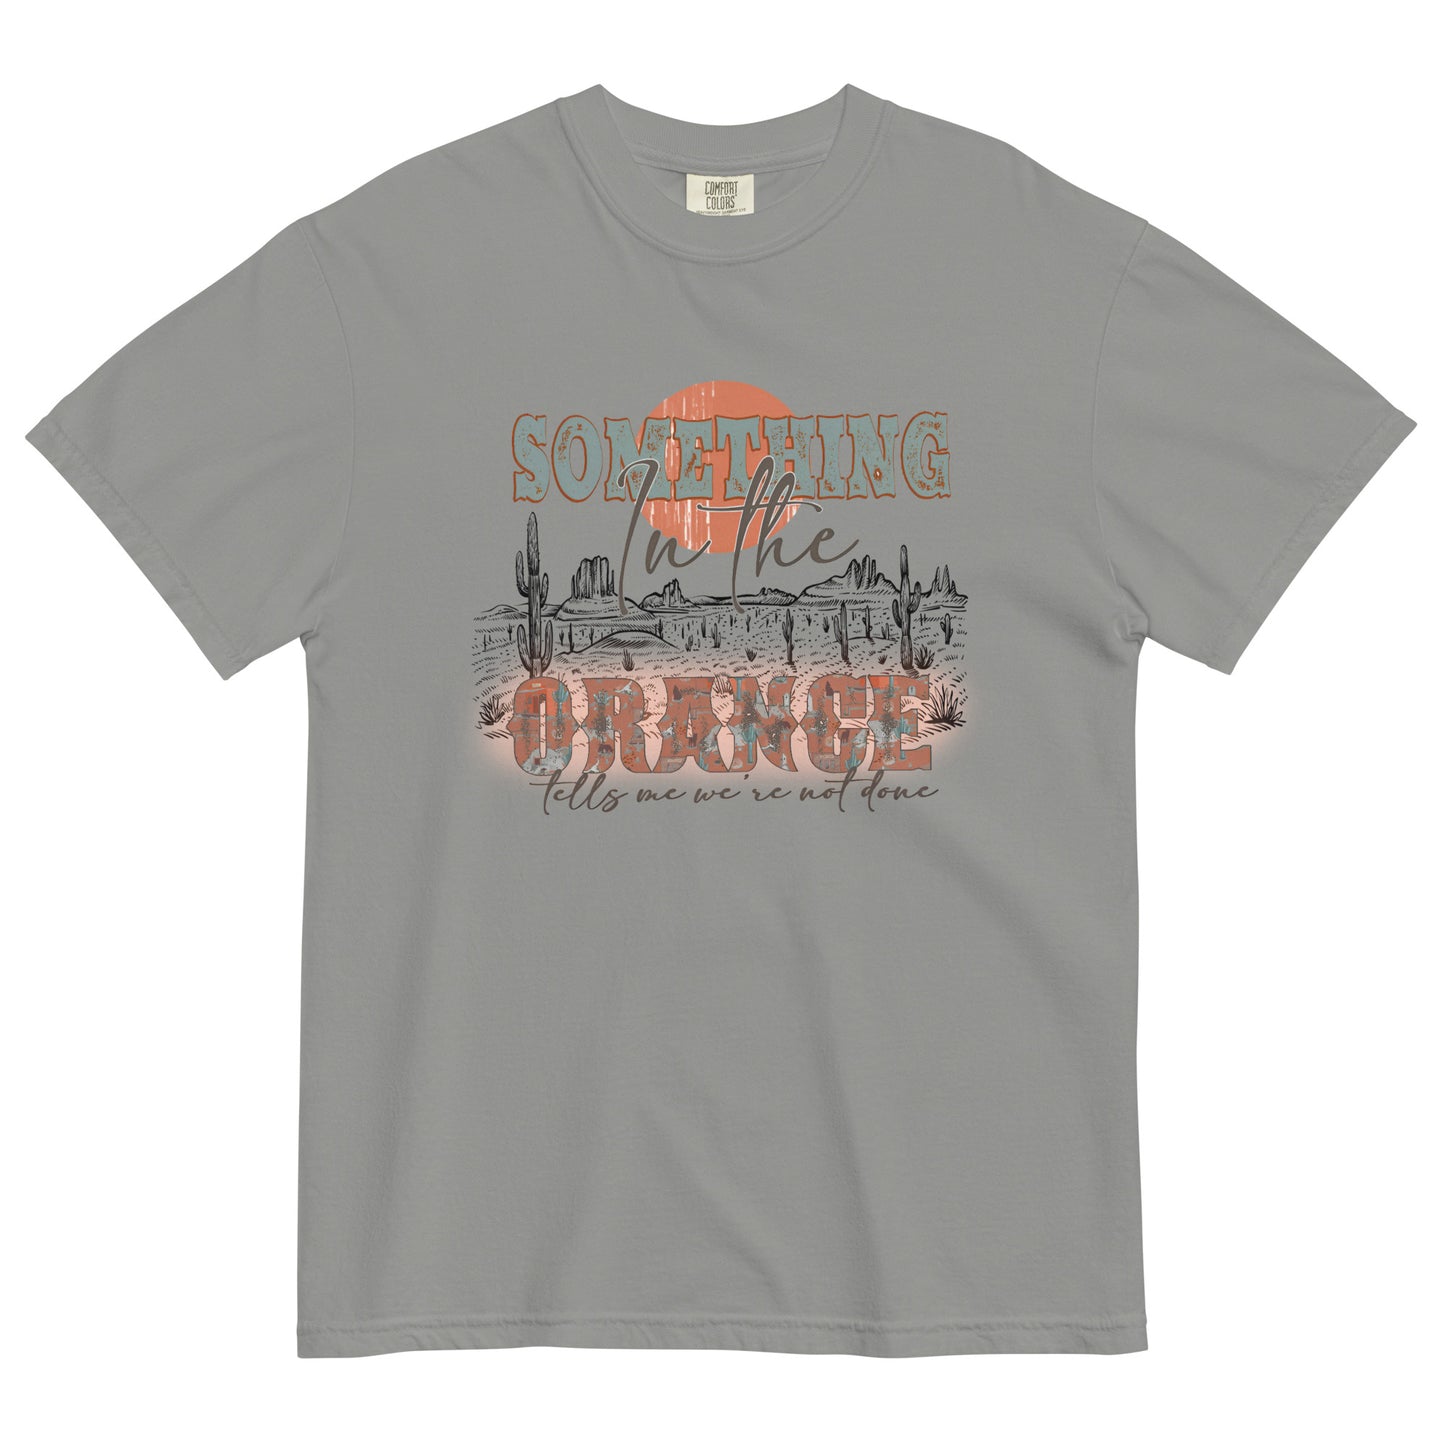 "Something in the Orange" Comfort Colors Graphic Tee